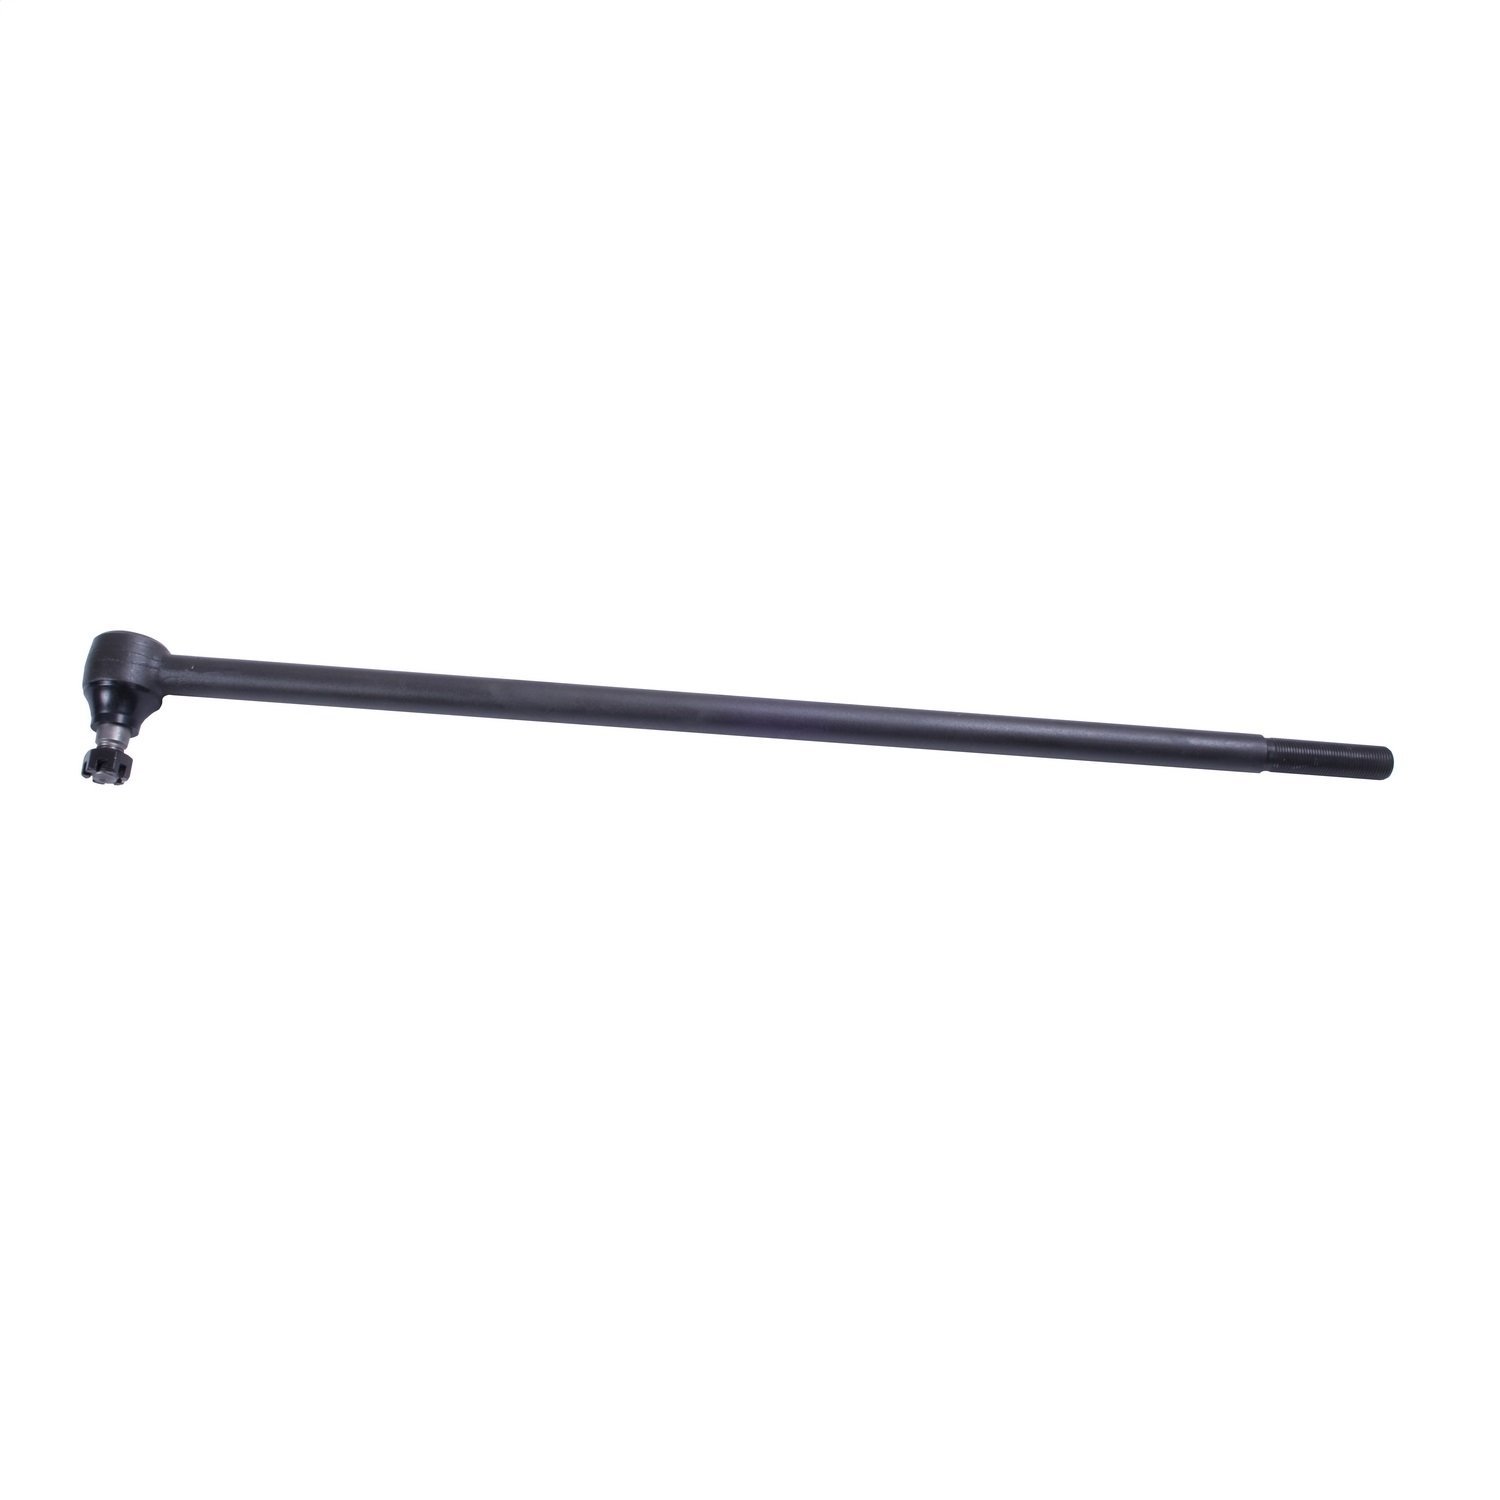 This long tie rod from Omix-ADA fits 72-83 Jeep CJ-5s and 76-81 CJ-7s. 24 inches long.